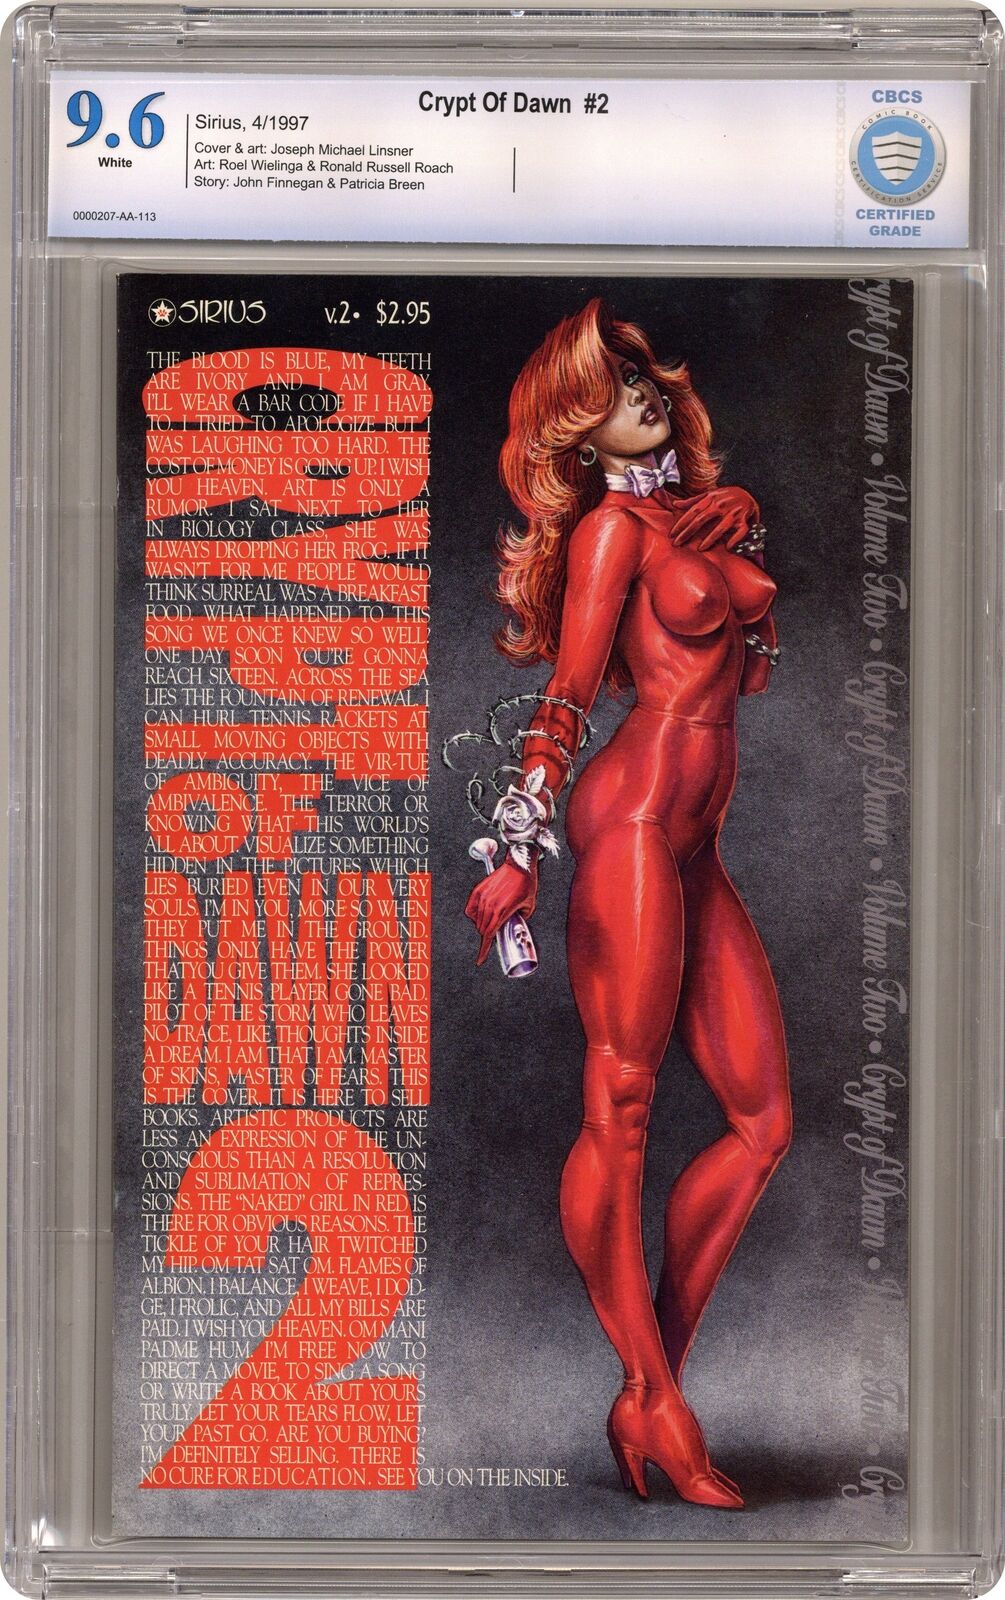 Crypt of Dawn #2 CBCS 9.6 1996 0000207-AA-113